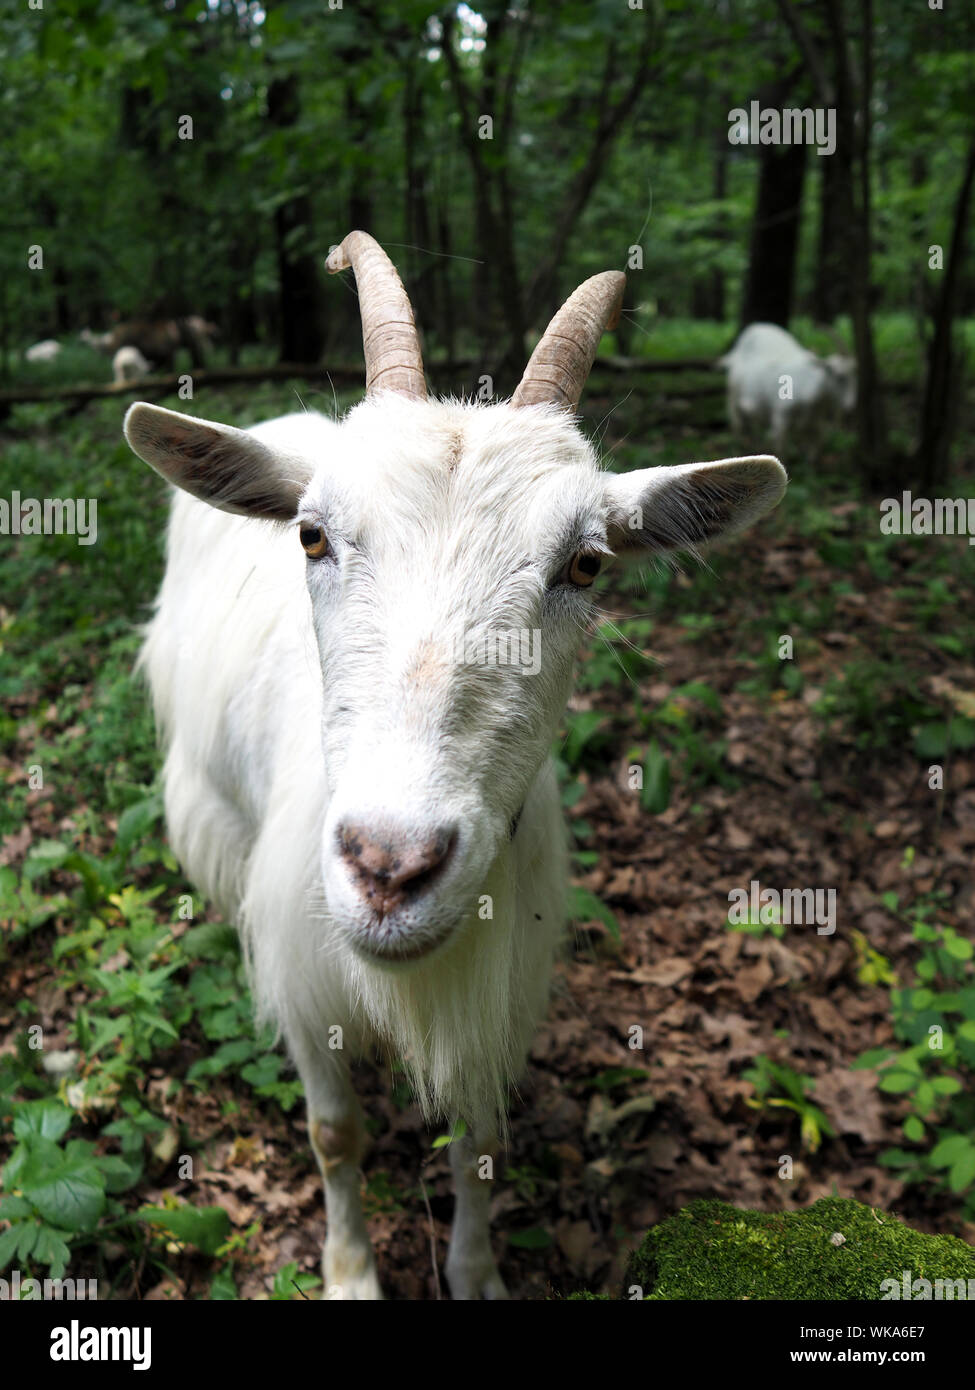 White Goat Standing In Forest Stock Photo